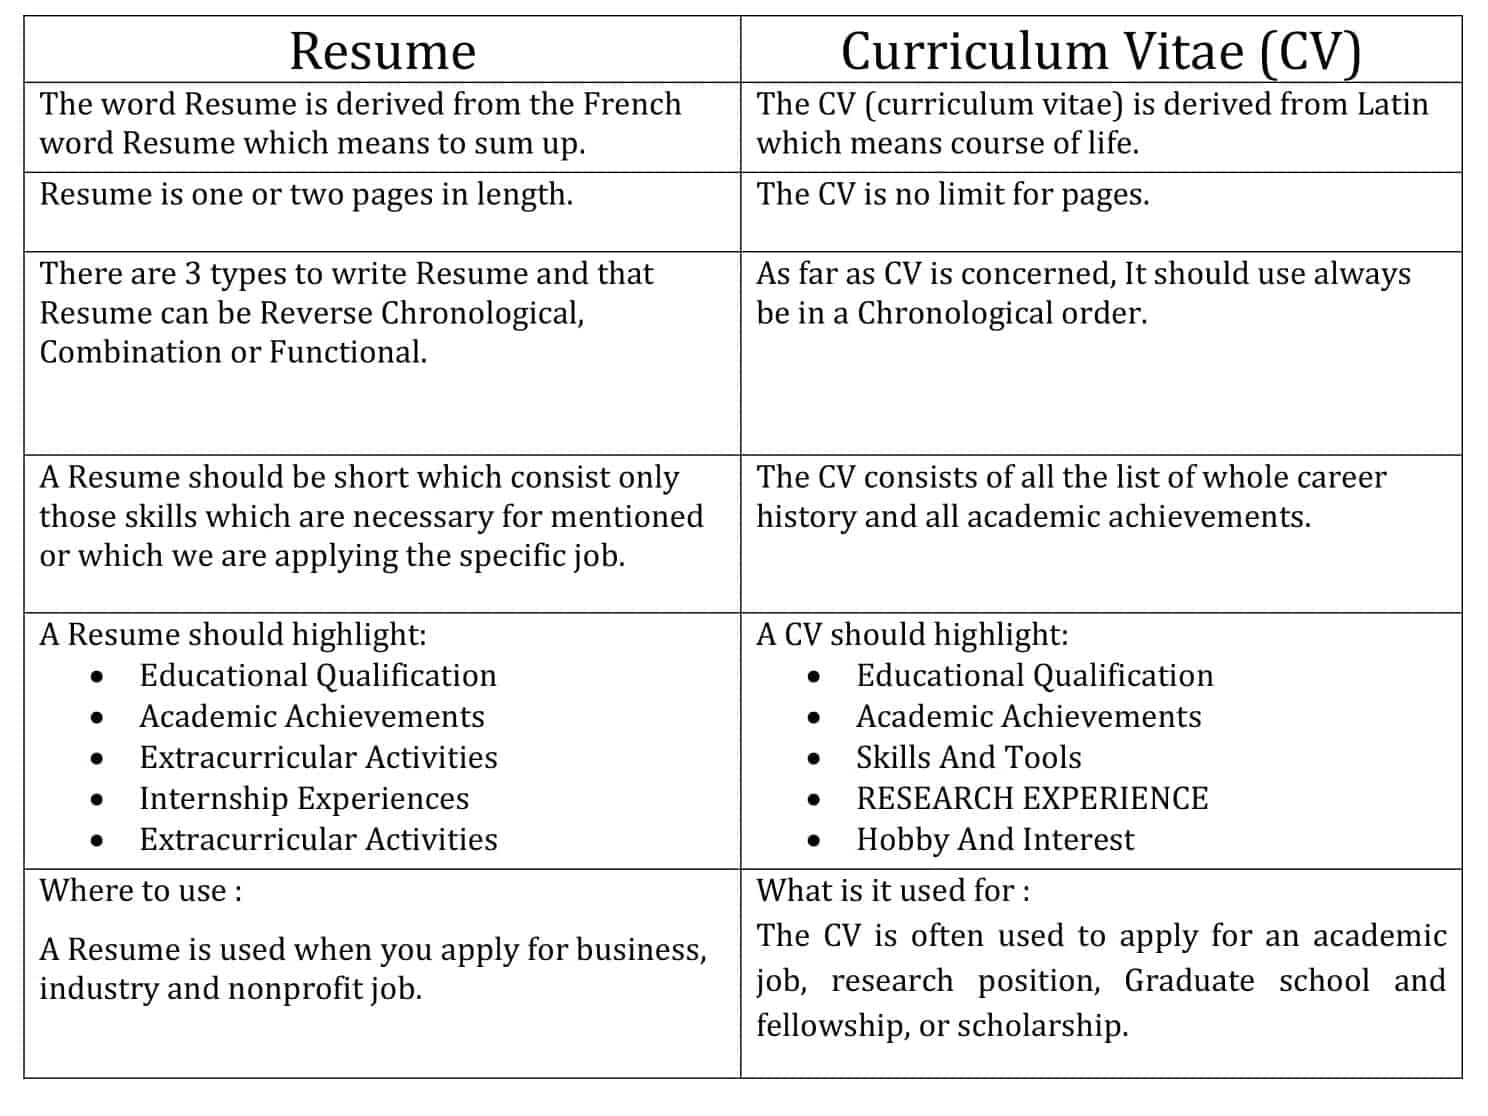 Difference between Resume and Curriculum Vitae